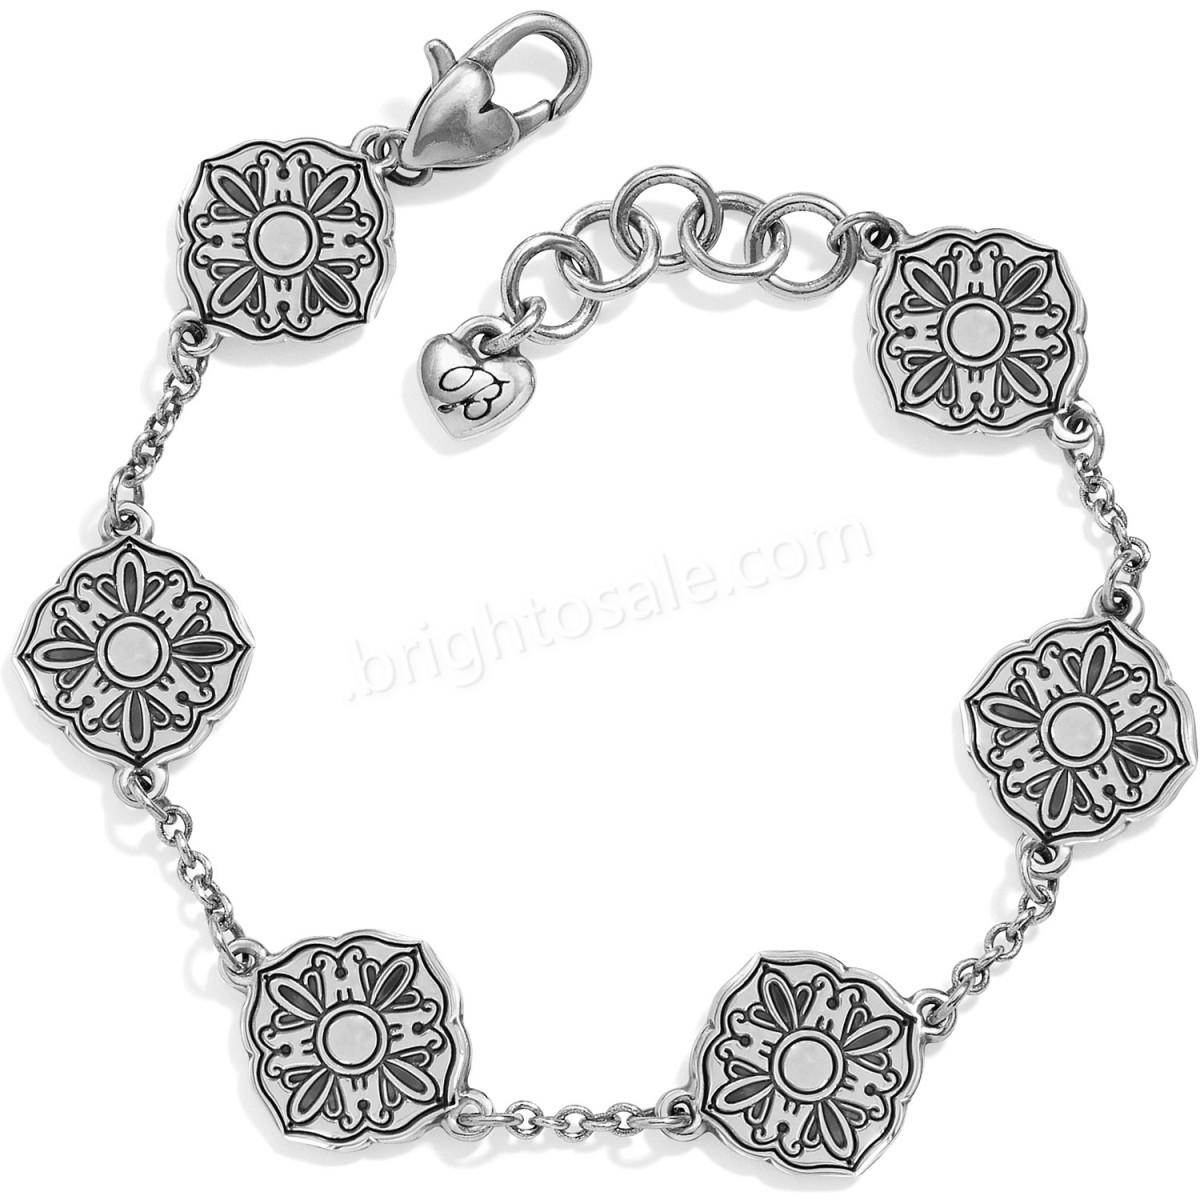 Brighton Collectibles & Online Discount Deauville Cross Necklace - -1